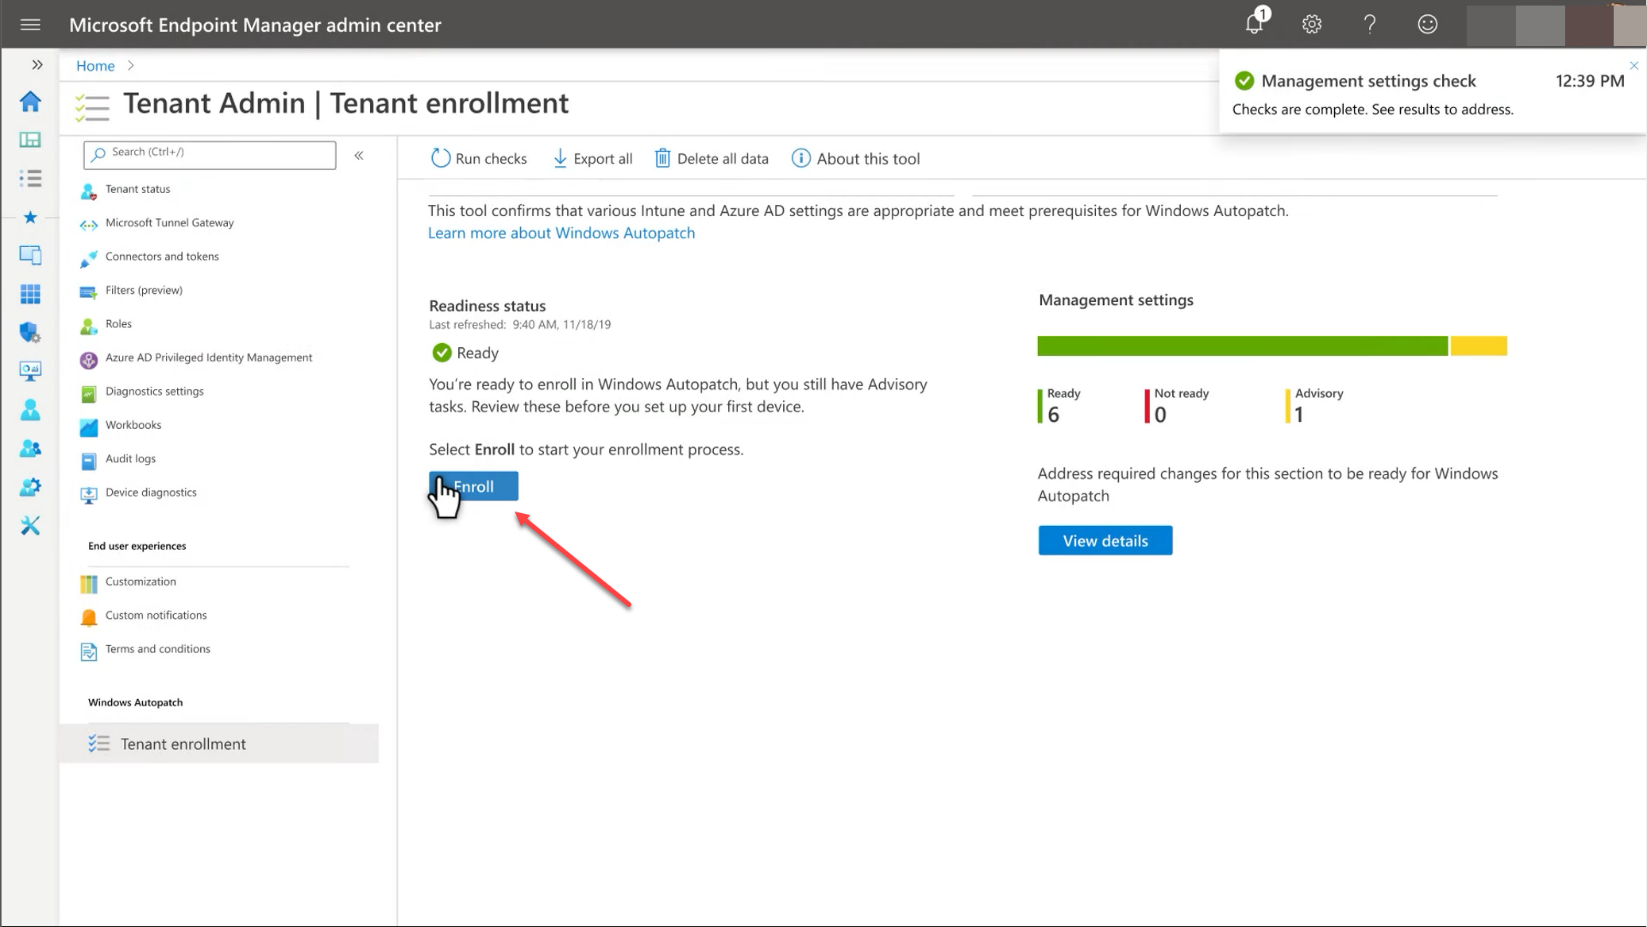 Click the Enroll button to enroll in Windows Autopatch